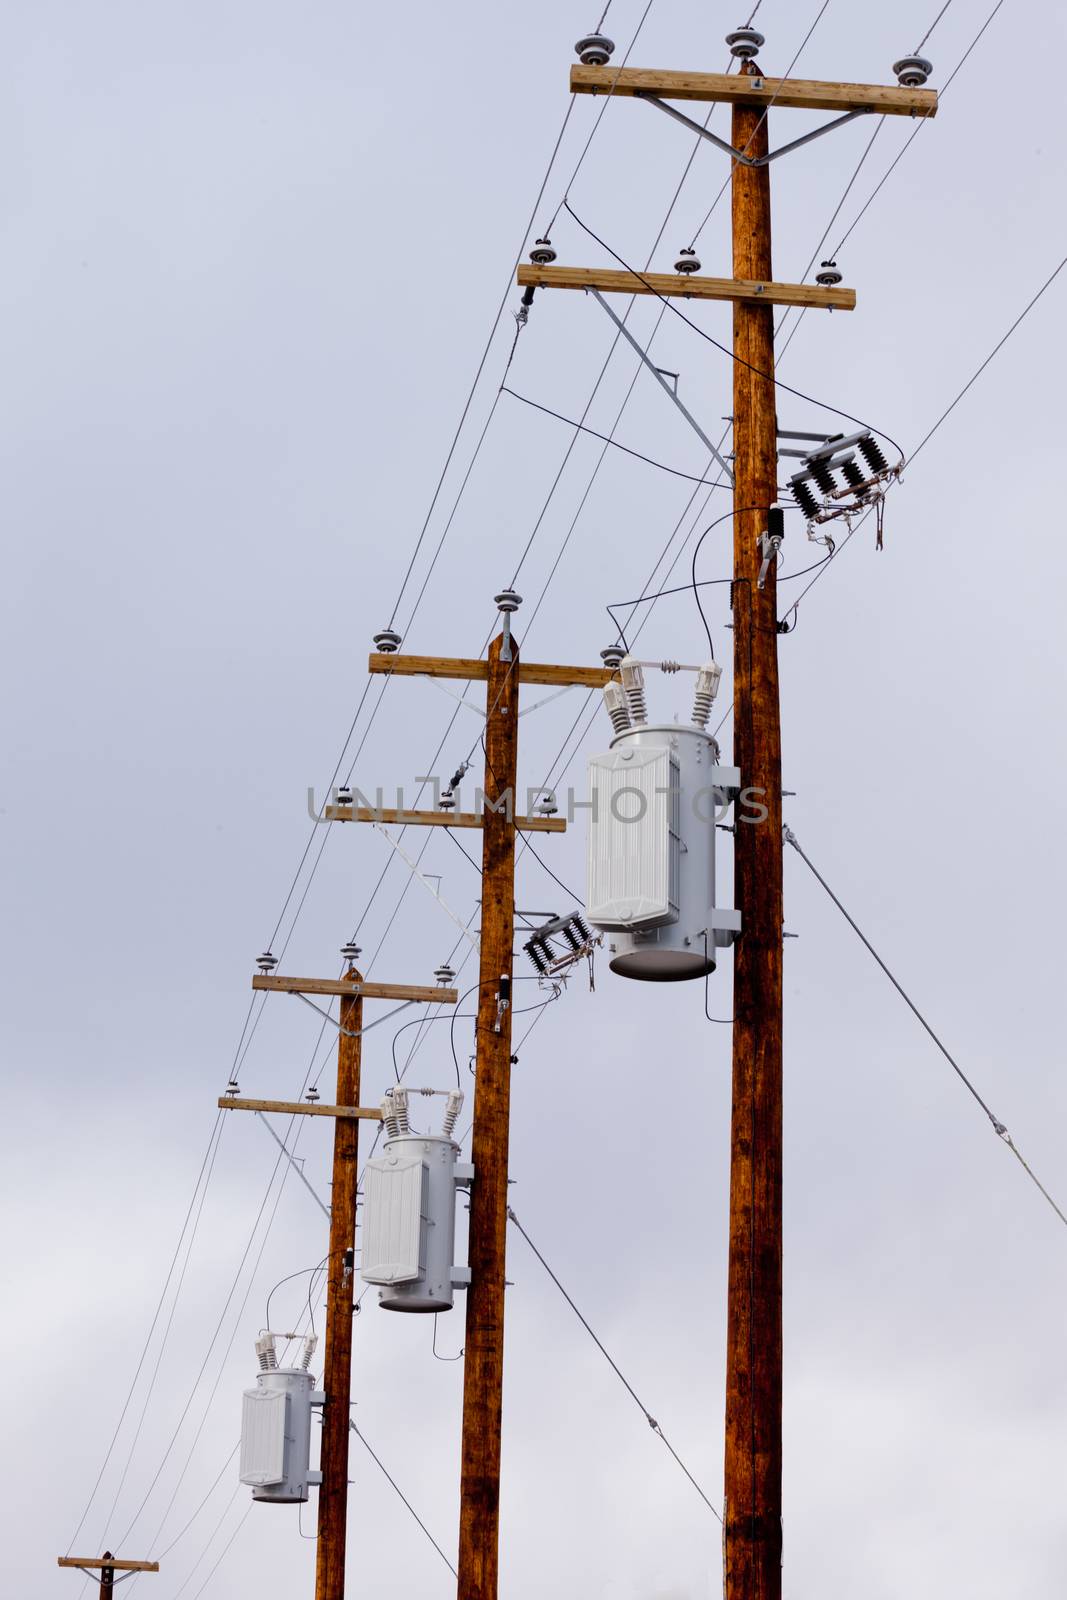 Row utility poles hung with electricity power cables and transformers for residential electric power supply